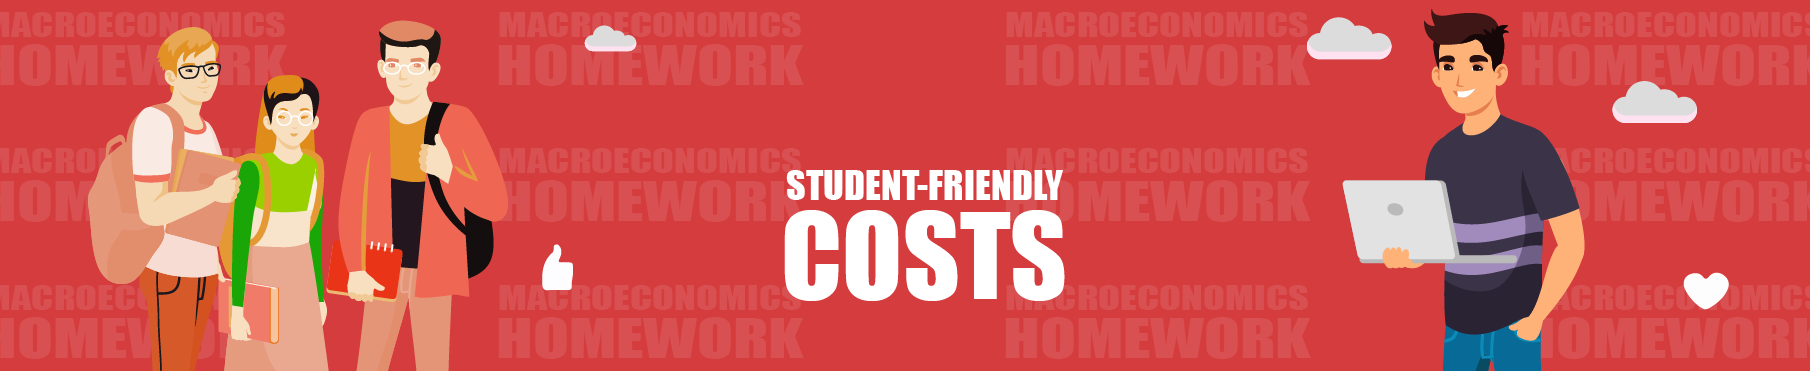 STUDENT-FRIENDLY  Prices to Access Our Macroeconomics